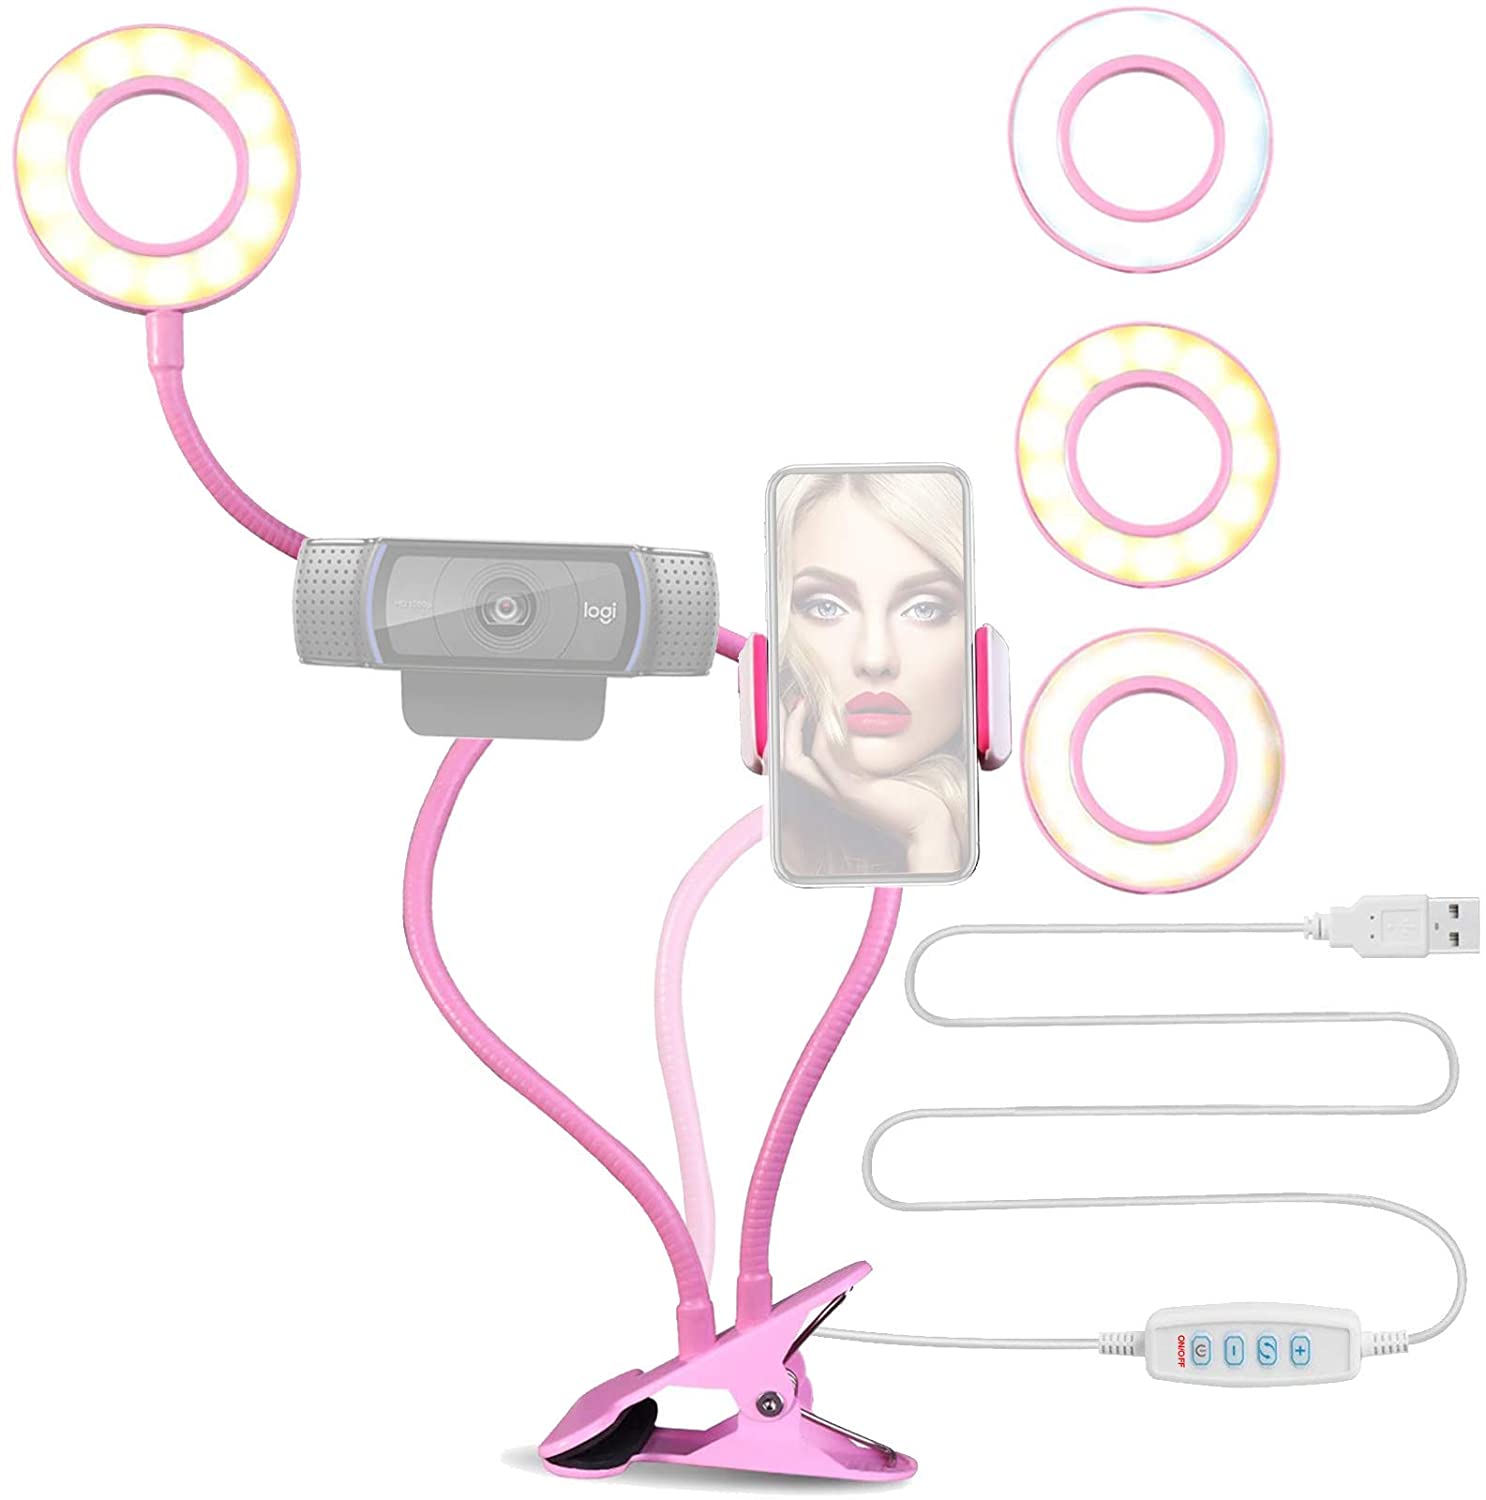 Single Ring Light with 3 Lighting Modes and phone/webcam holder (Pink)